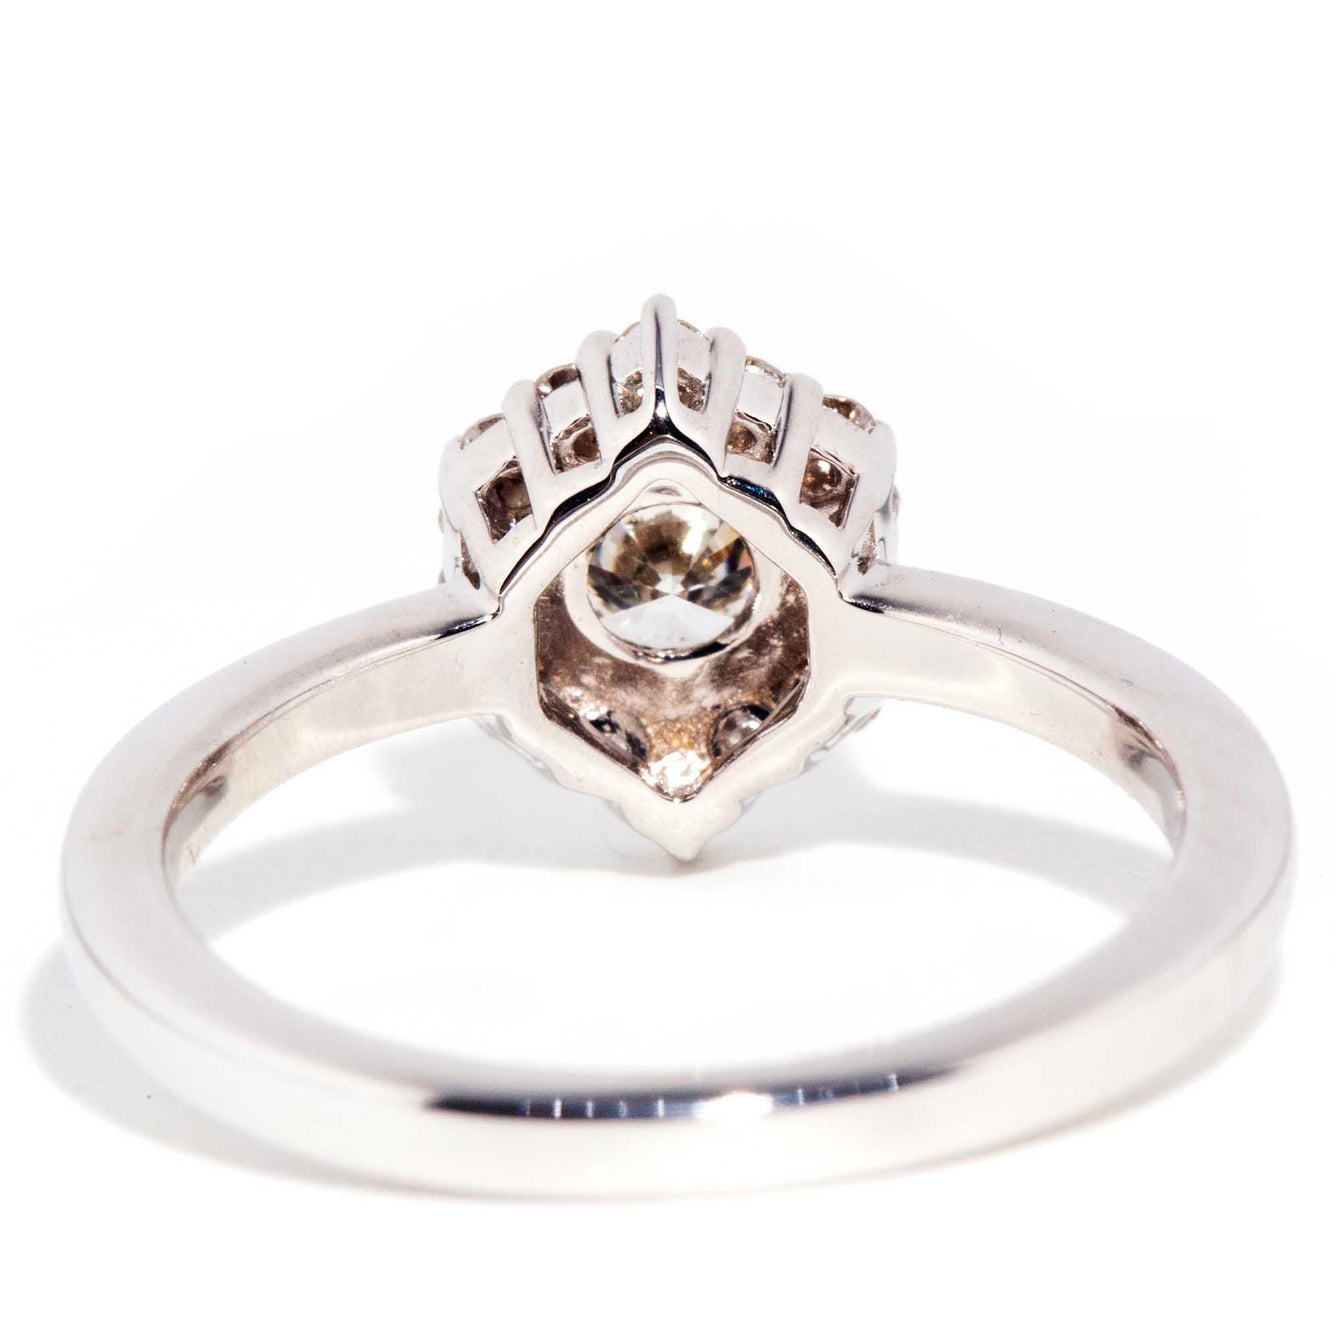 QUINN Contemporary 18ct White Gold Diamond Hexagonal Halo Ring* OB Gemmo $ Rings Imperial Jewellery 